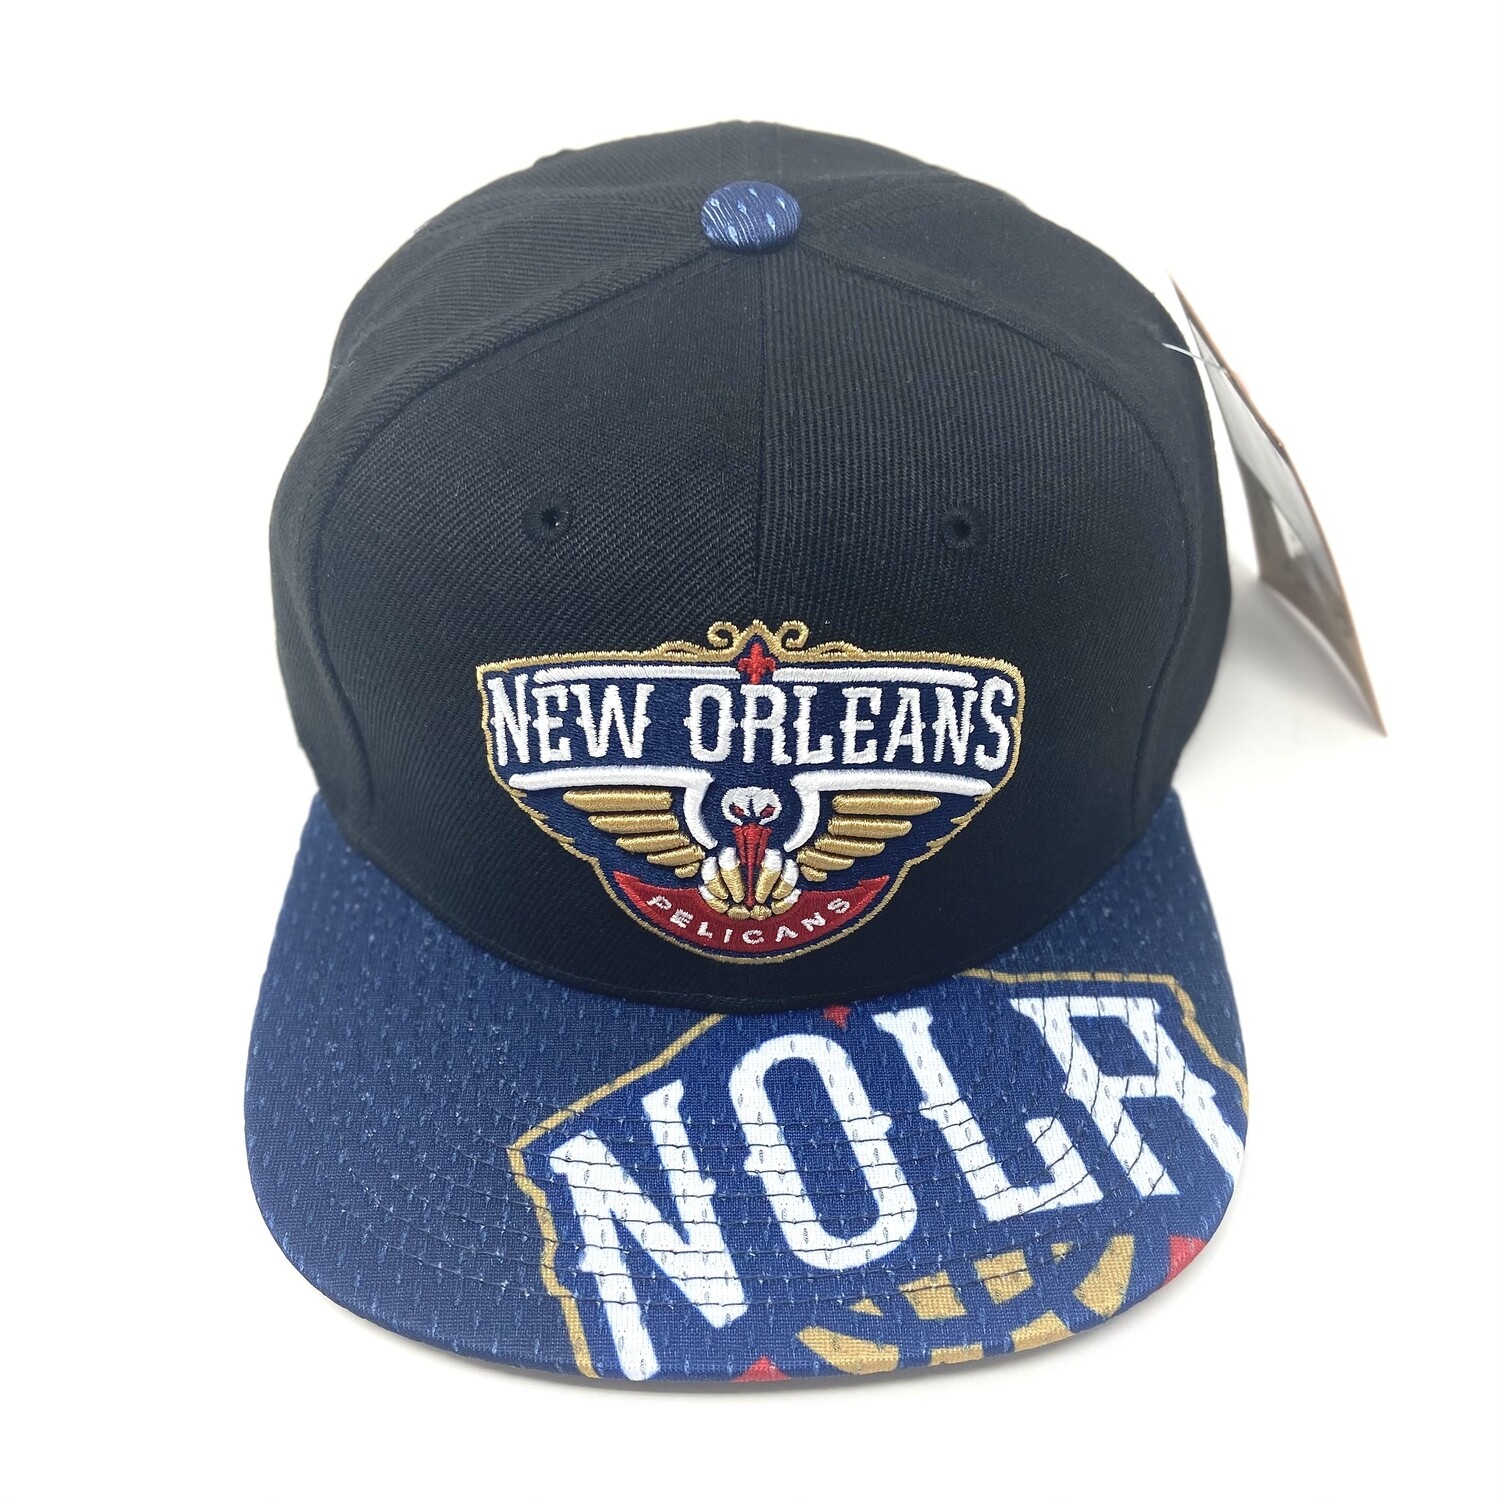 Men's New Orleans Pelicans Mitchell & Ness Red Core Side Snapback Hat